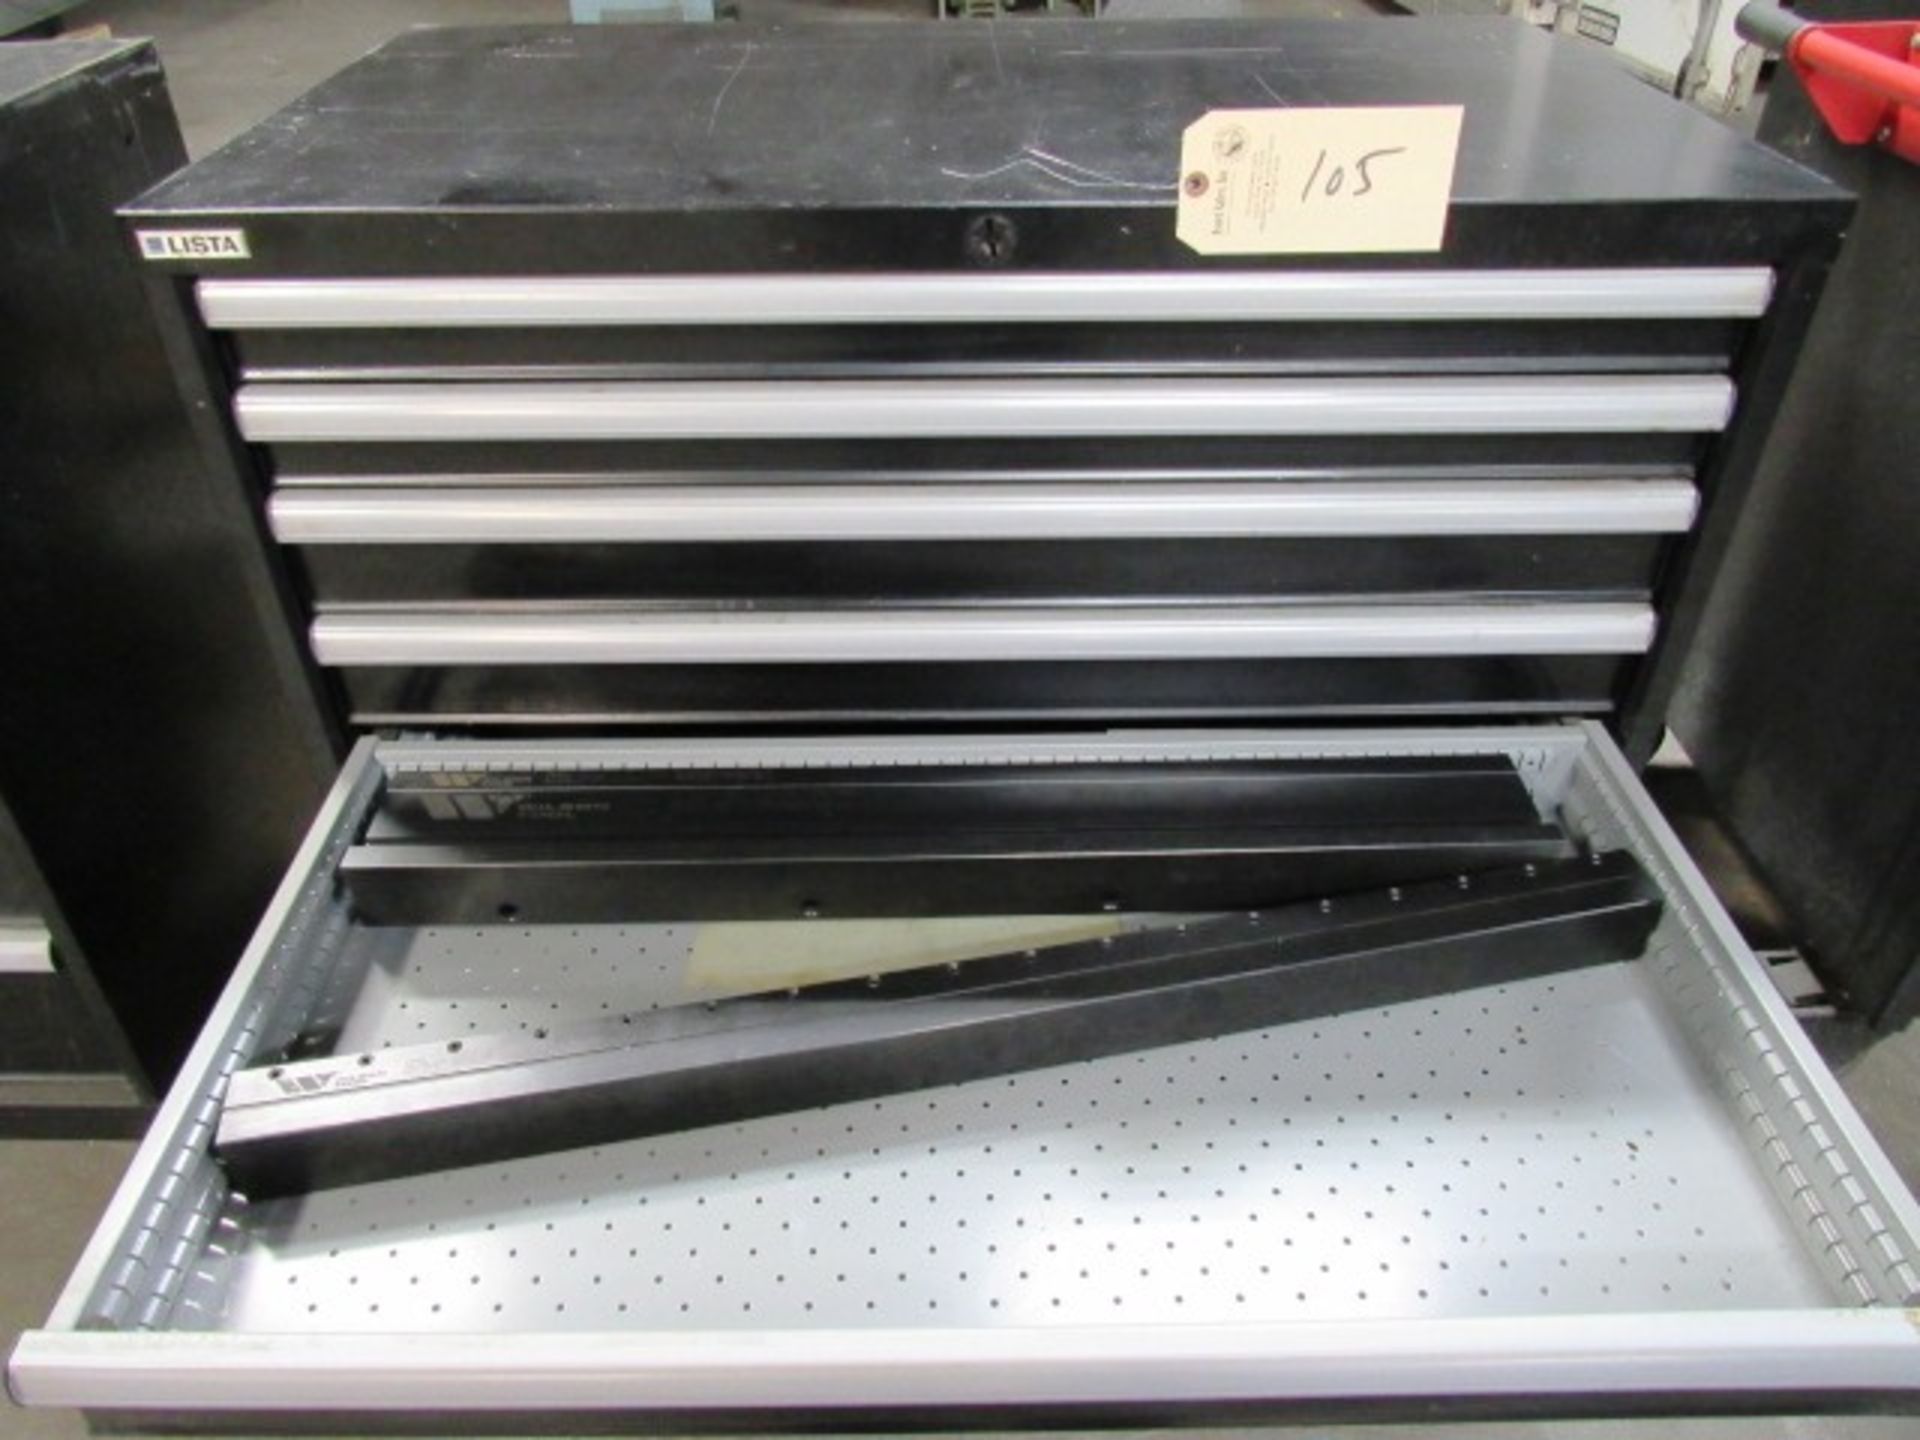 Lista 7 Drawer Cabinet with Press Brake Dies - Image 5 of 8